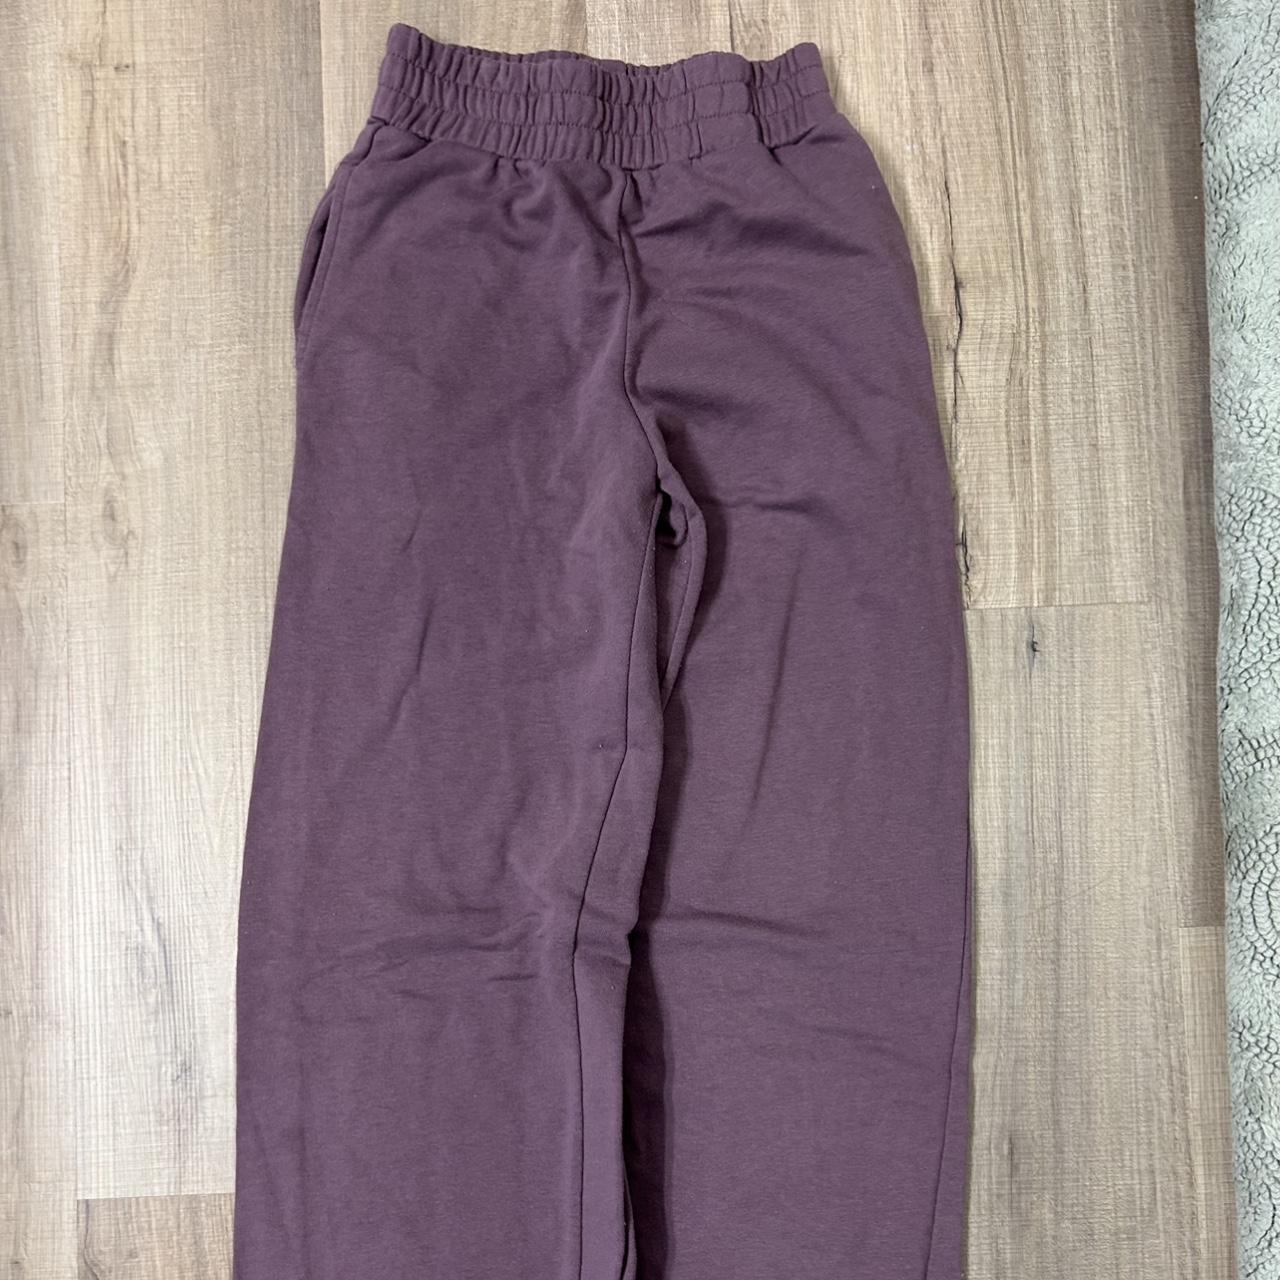 wild fable target sweatpants with drawstring, - Depop